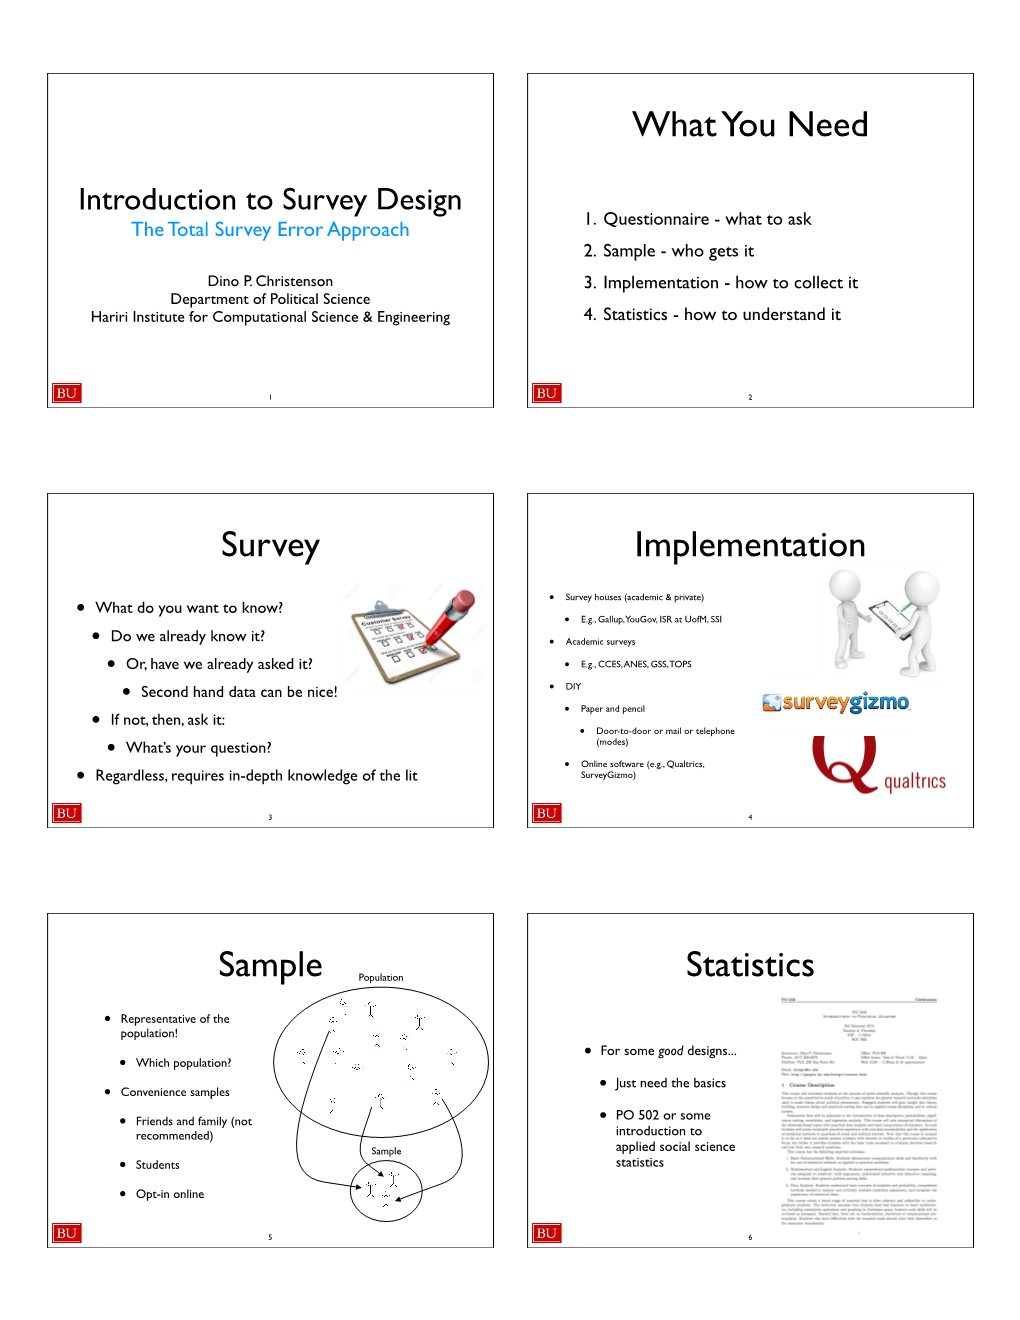 What You Need Survey Implementation Sample Statistics